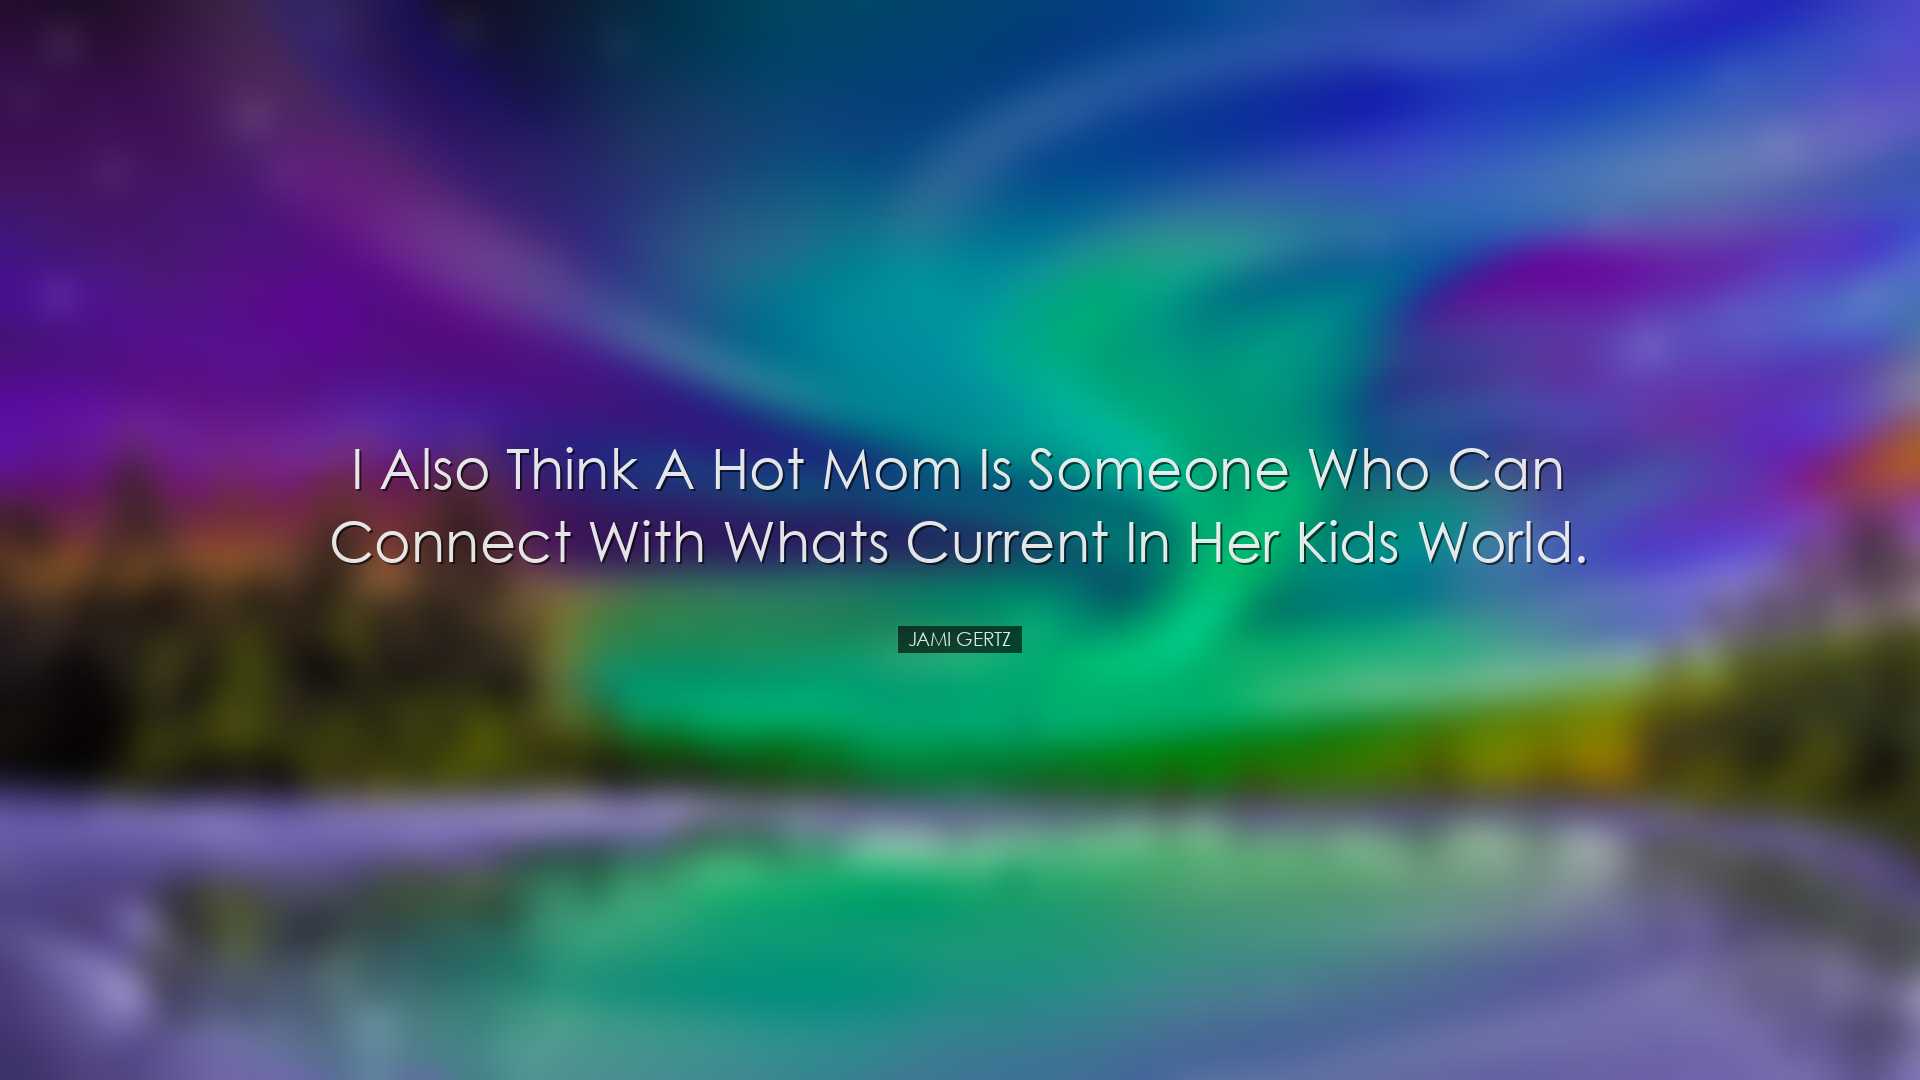 I also think a Hot Mom is someone who can connect with whats curre